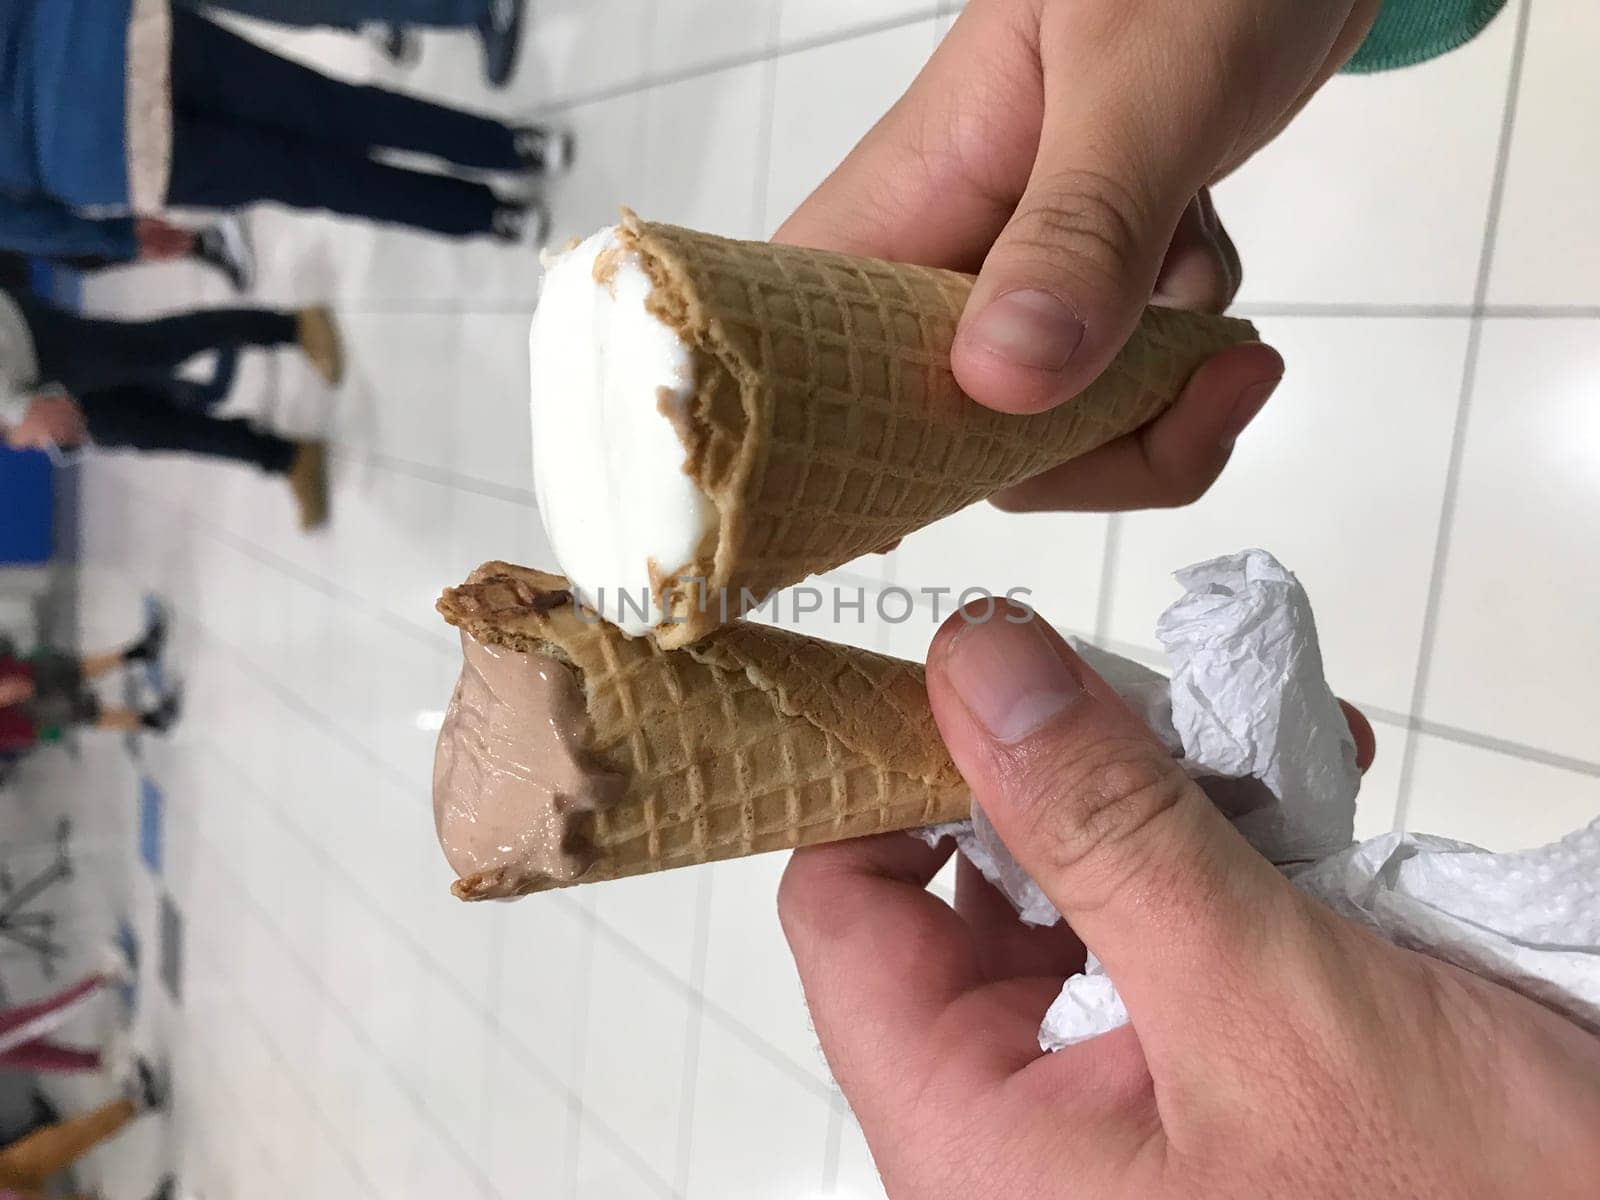 Close-up of a hand holding two ice cream cones with melting scoops, indoors with blurred people in the background